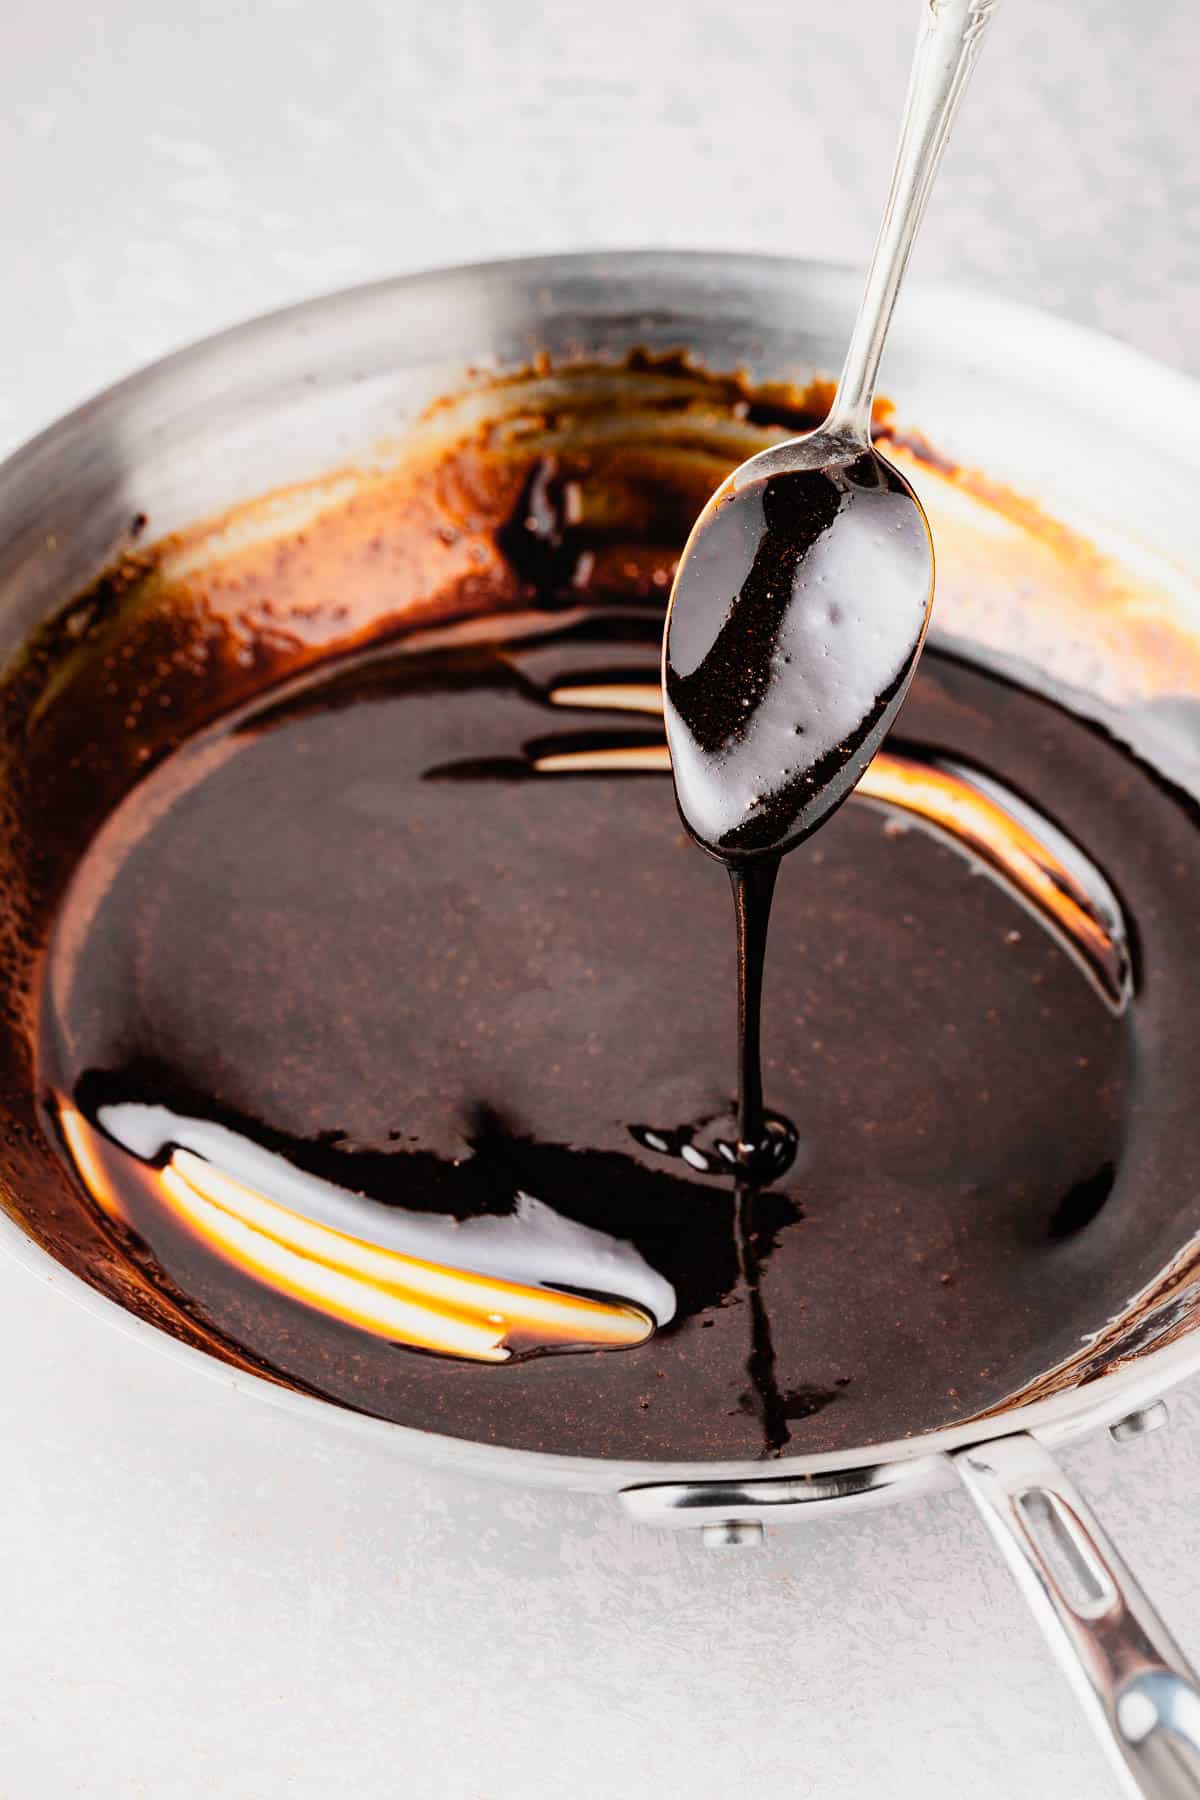 balsamic glaze being drizzled from a spoon into a skillet.